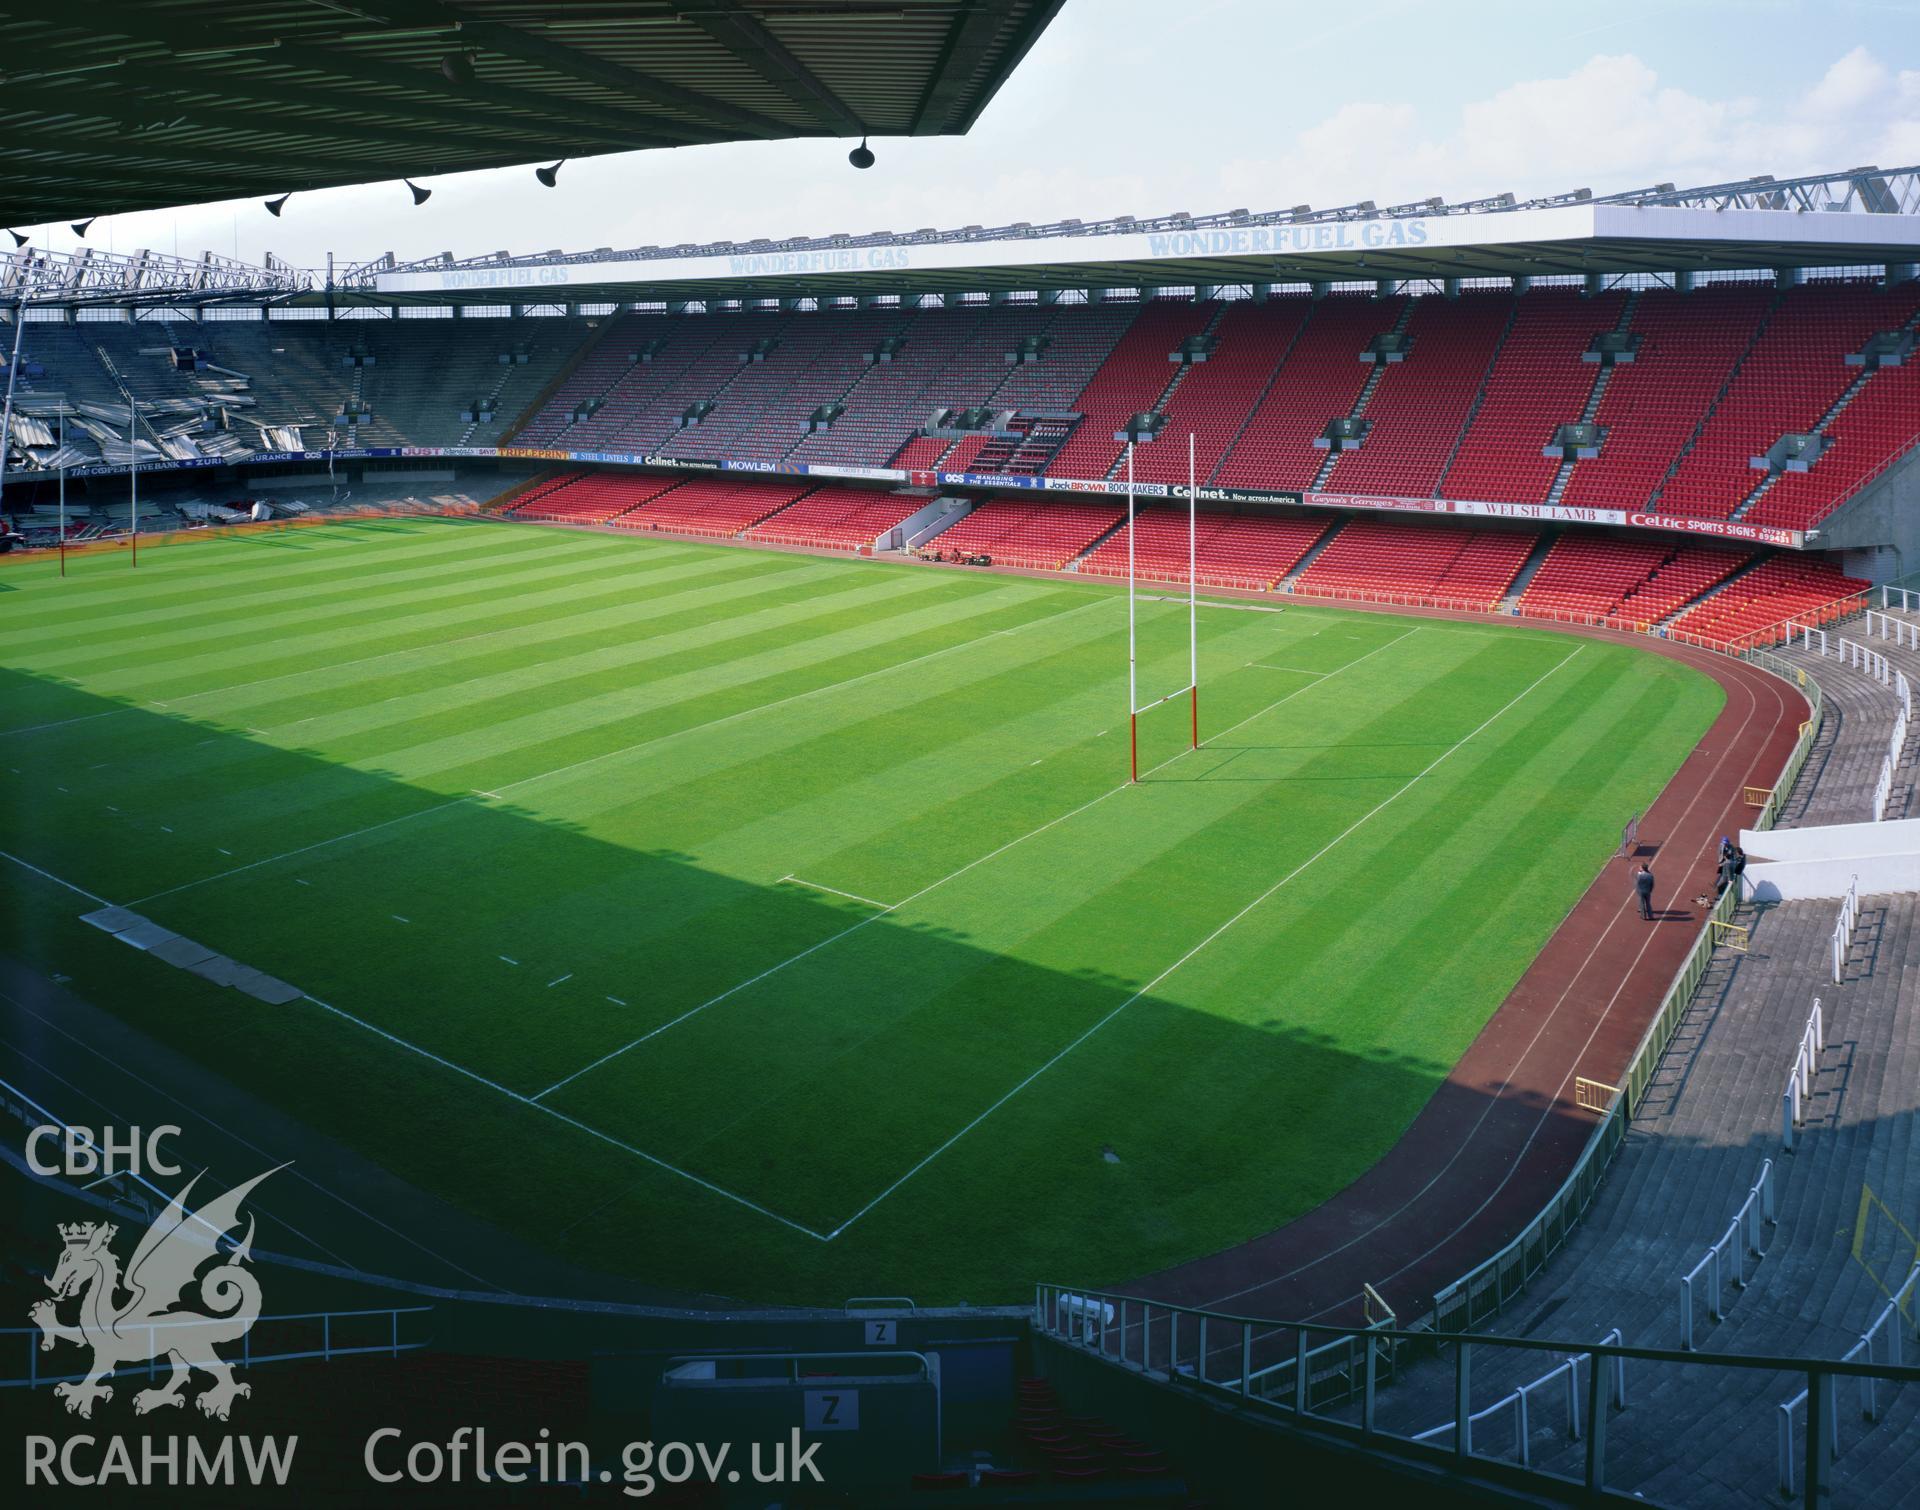 Colour transparency showing a view of the pitch and seating at Cardiff Arms Park, produced by Iain Wright 1997